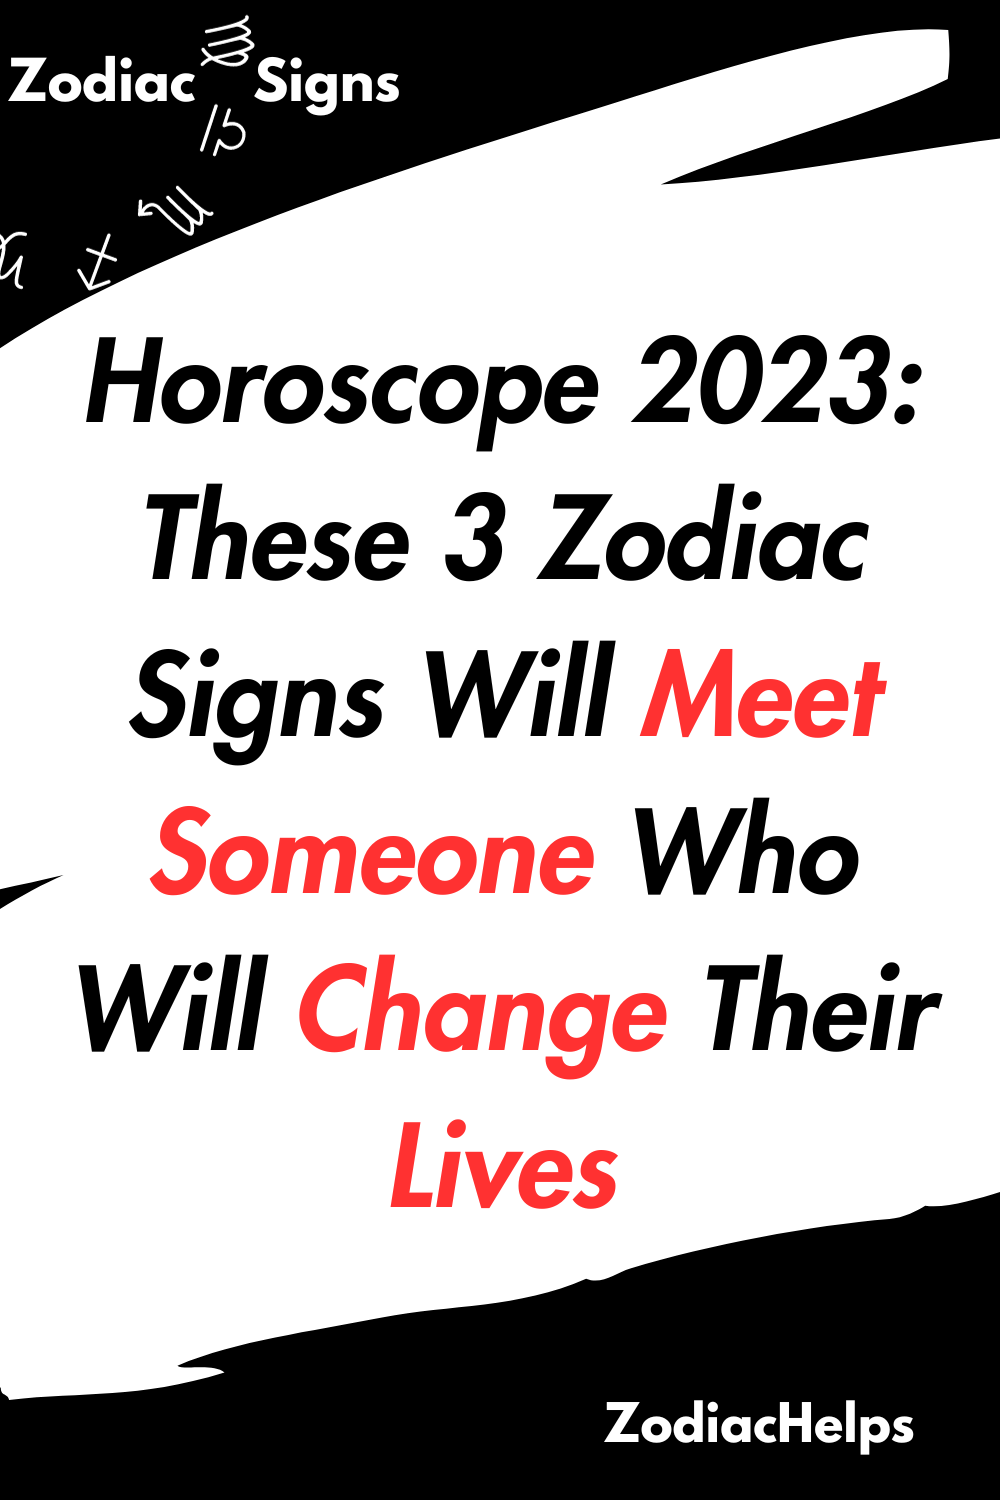 Horoscope 2023: These 3 Zodiac Signs Will Meet Someone Who Will Change Their Lives